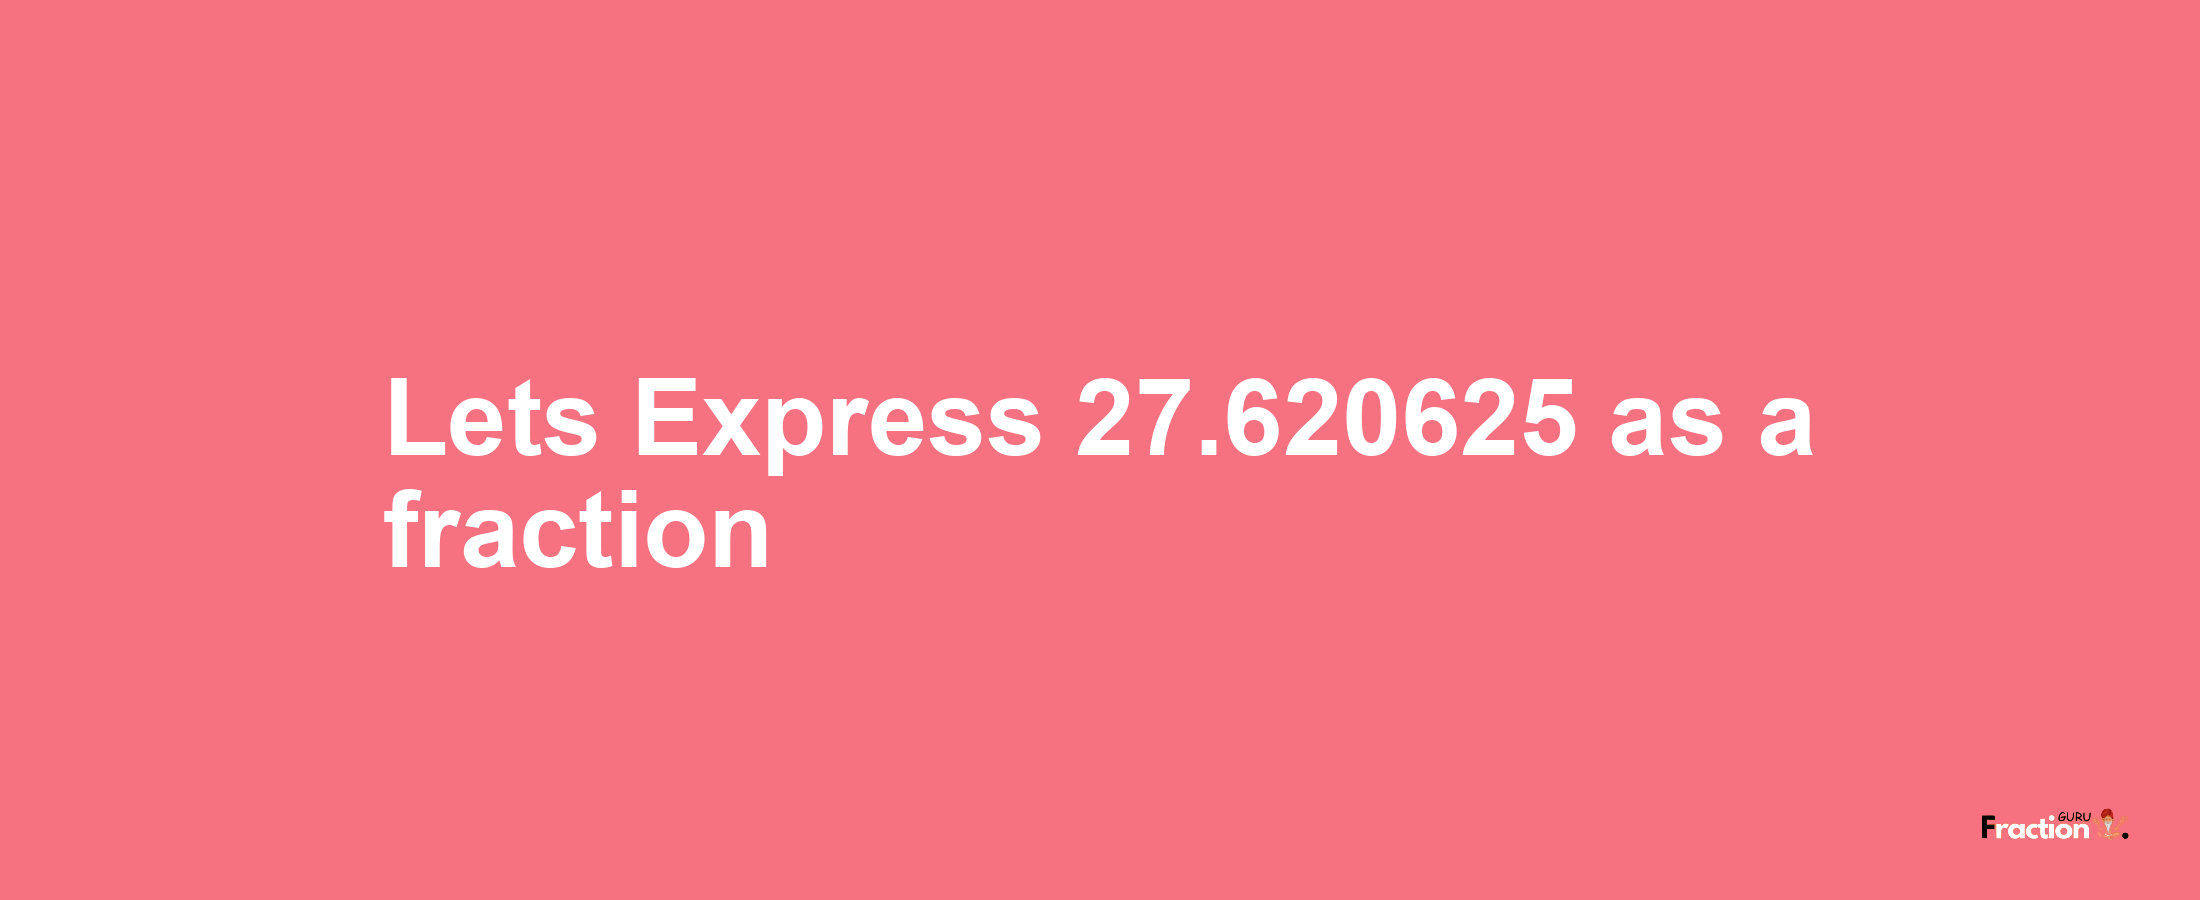 Lets Express 27.620625 as afraction